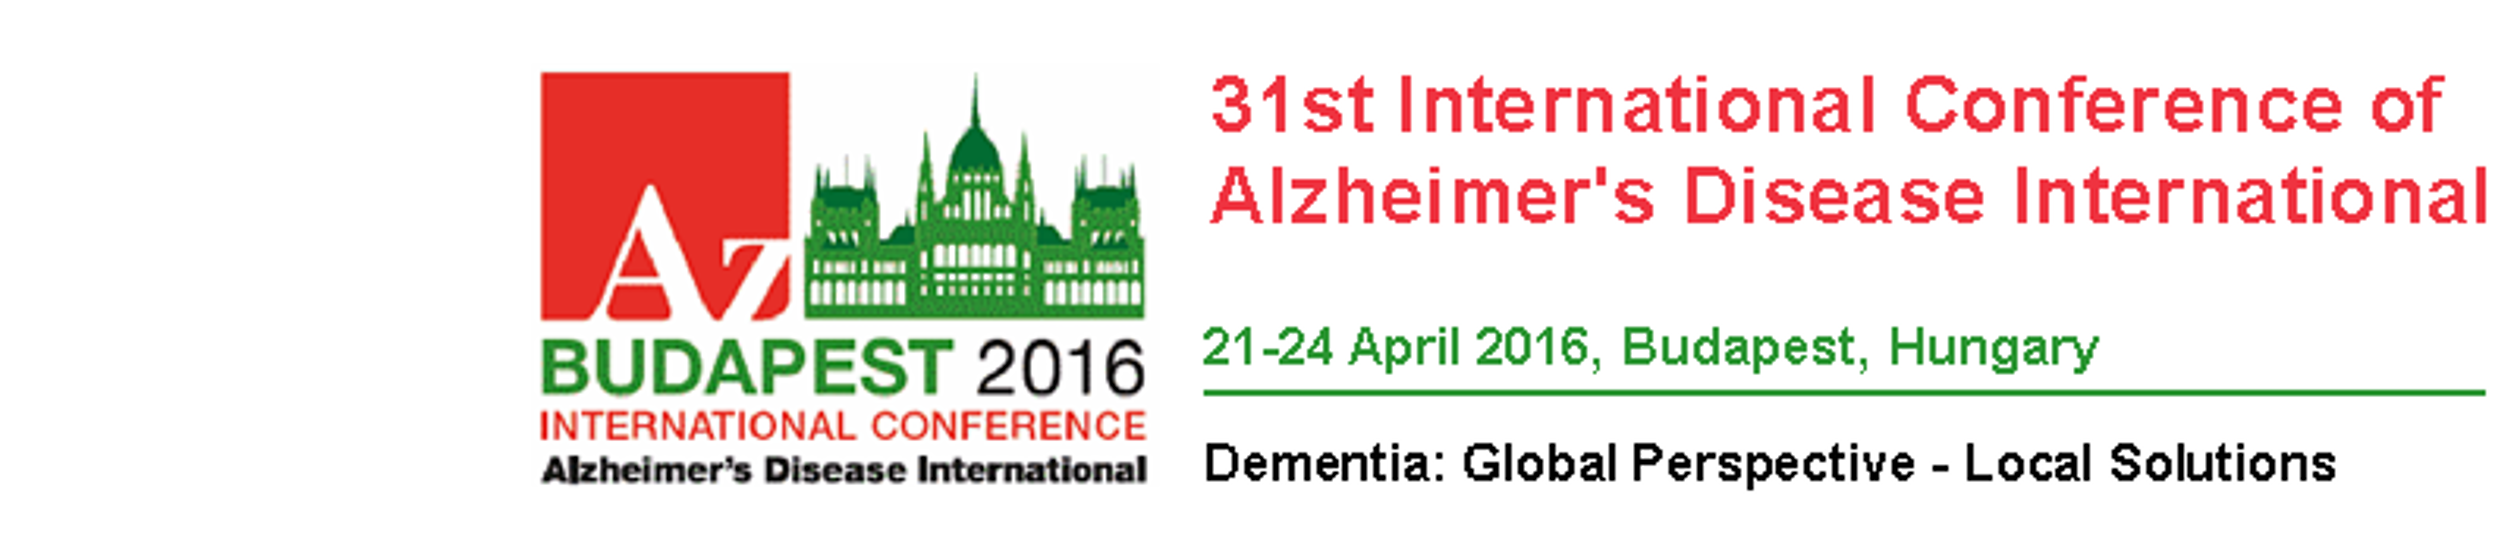 Budapest To Host Intl Conference On Alzheimer’s Disease